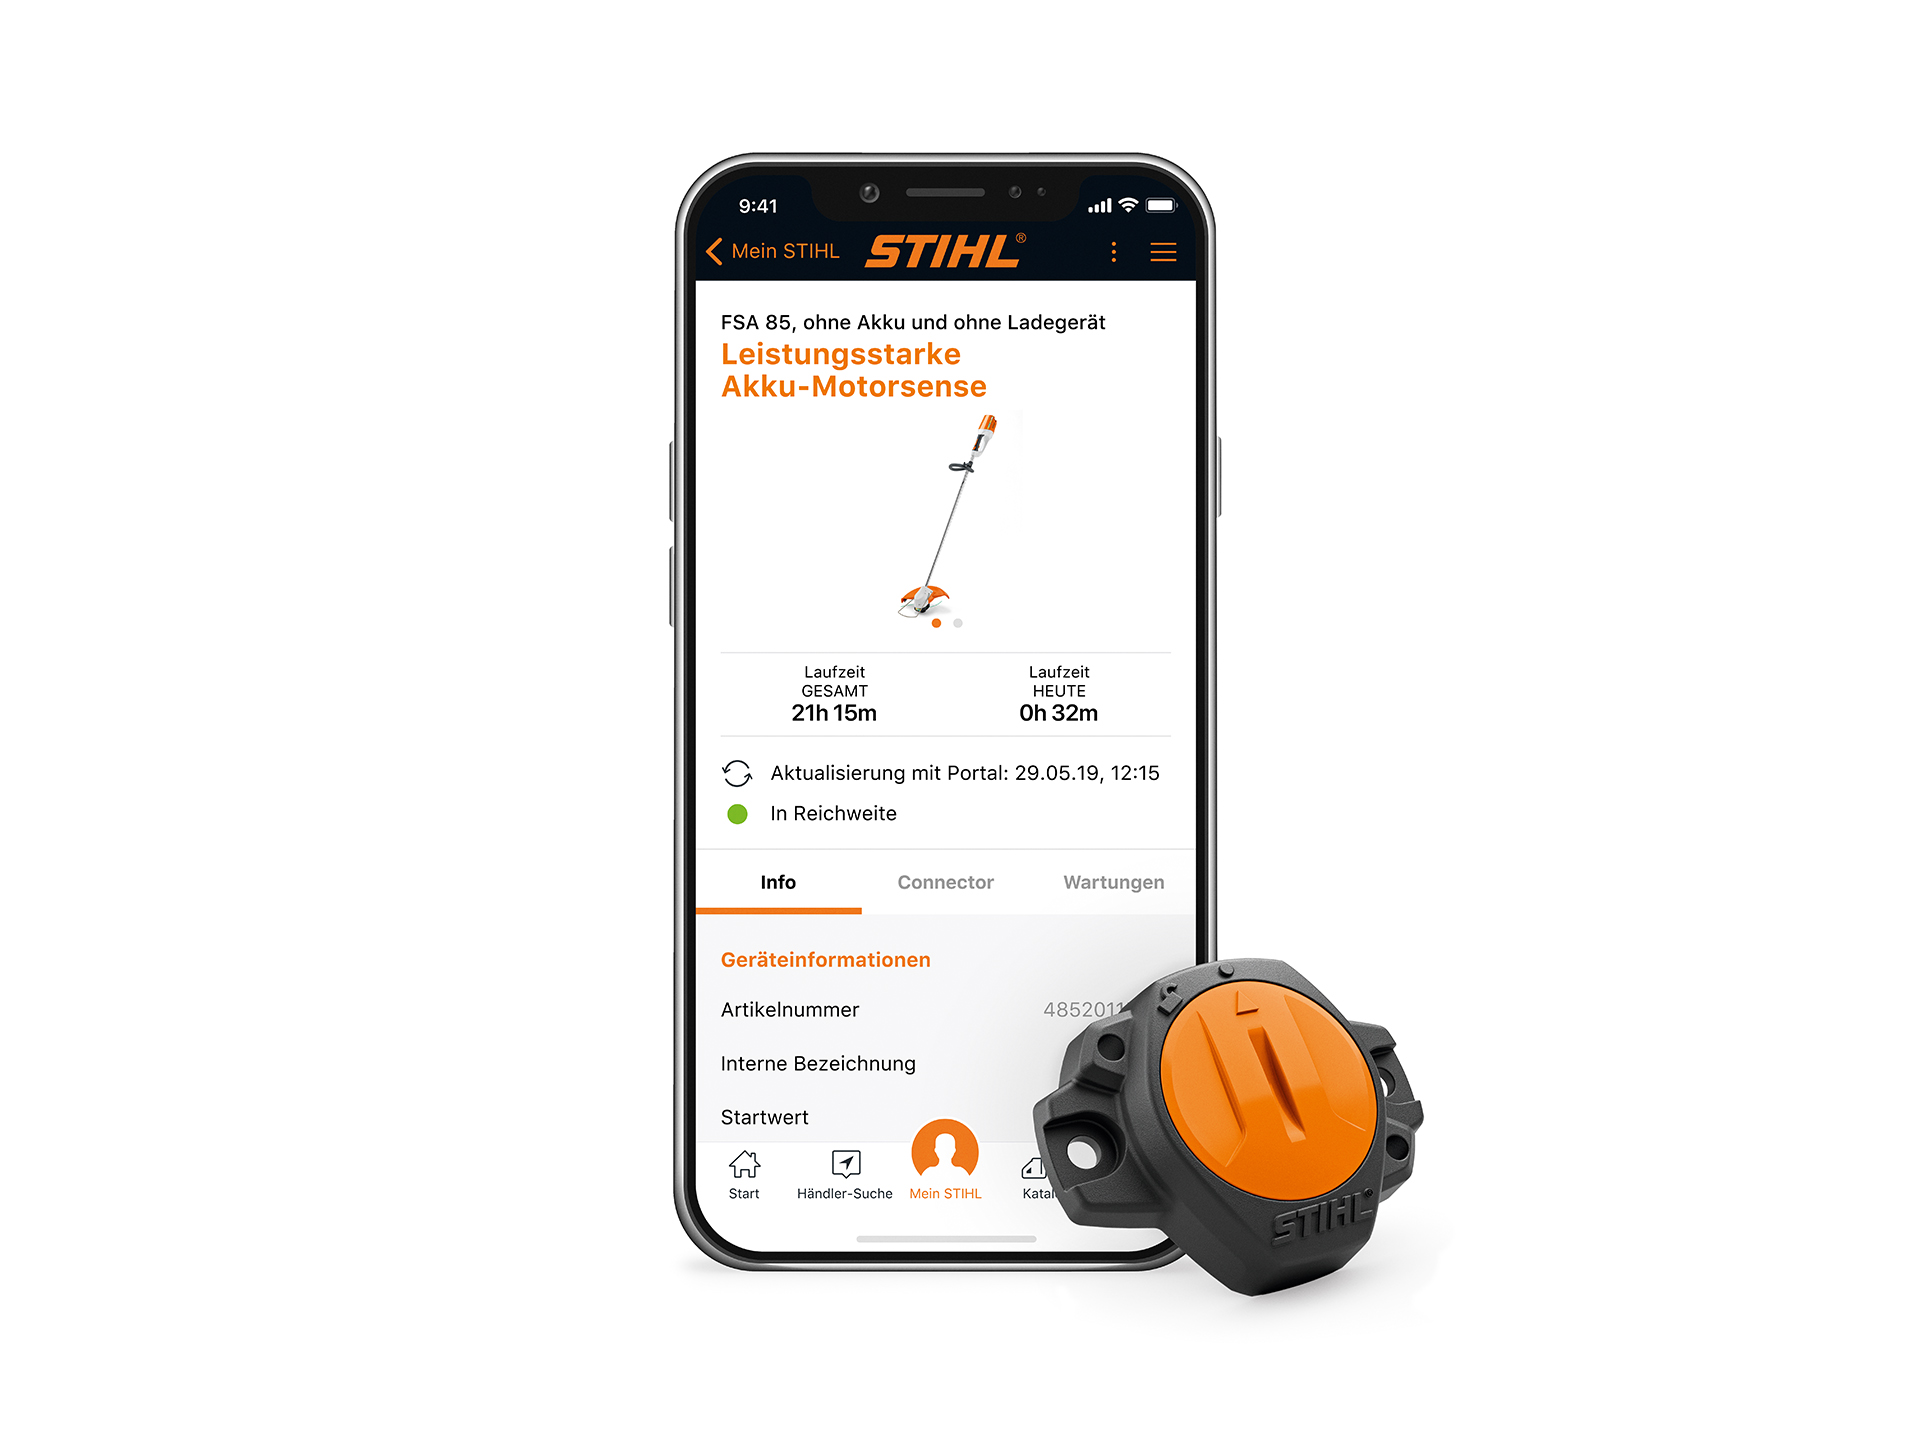 STIHL connected & smart solutions